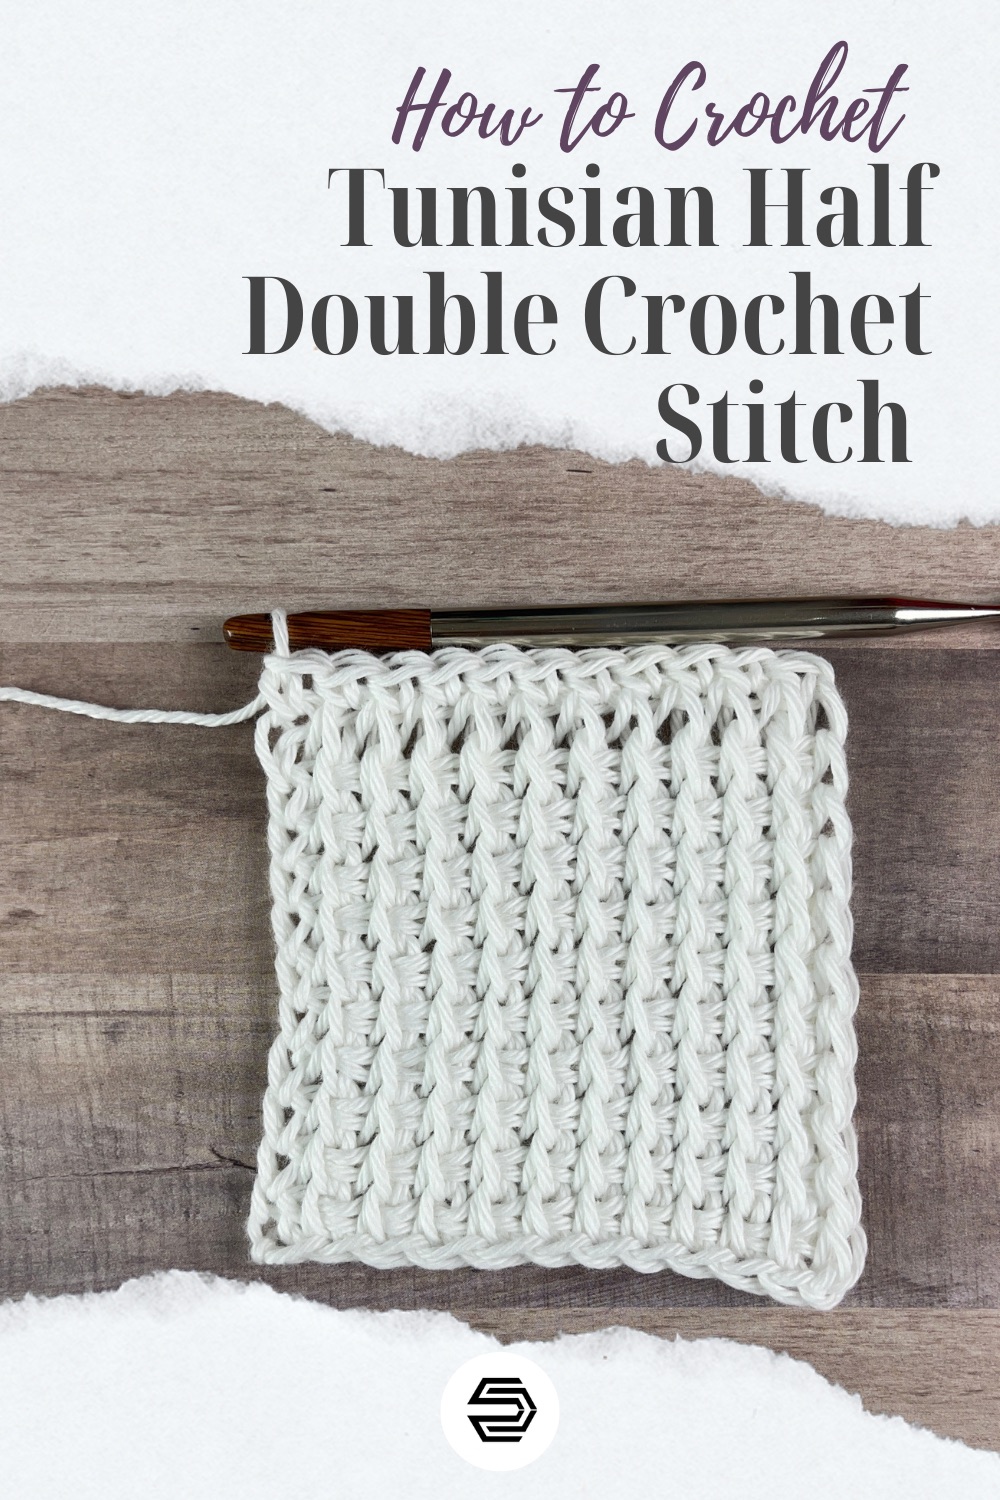 Learn how to create the tunisian half double crochet stitch. This stitch creates a lovely texture with no curl like some tunisian crochet stitches. Also see two examples of how this stitch is written in pattern form.